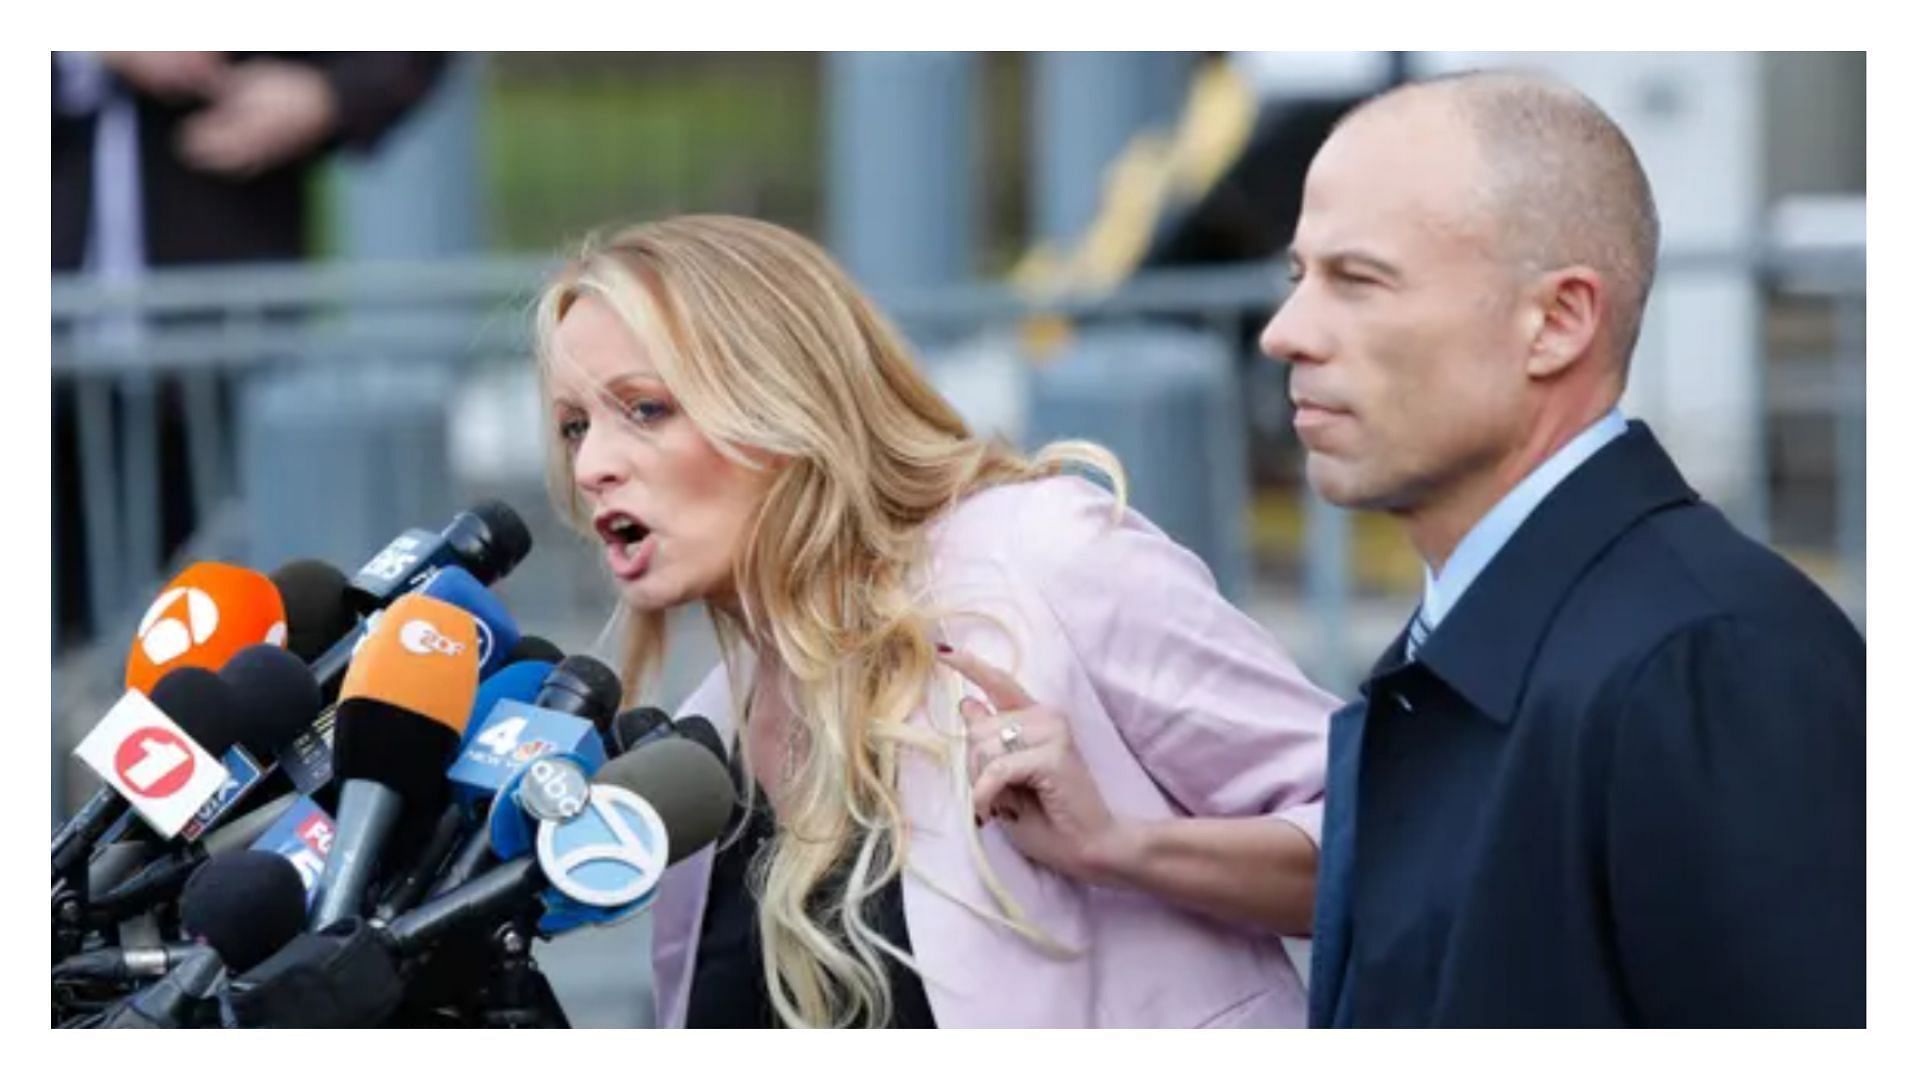 Disgraced attorney Michael Avenatti faces charges of cheating several clients, including Stormy Daniels (Image via Eduardo Munoz, Getty)